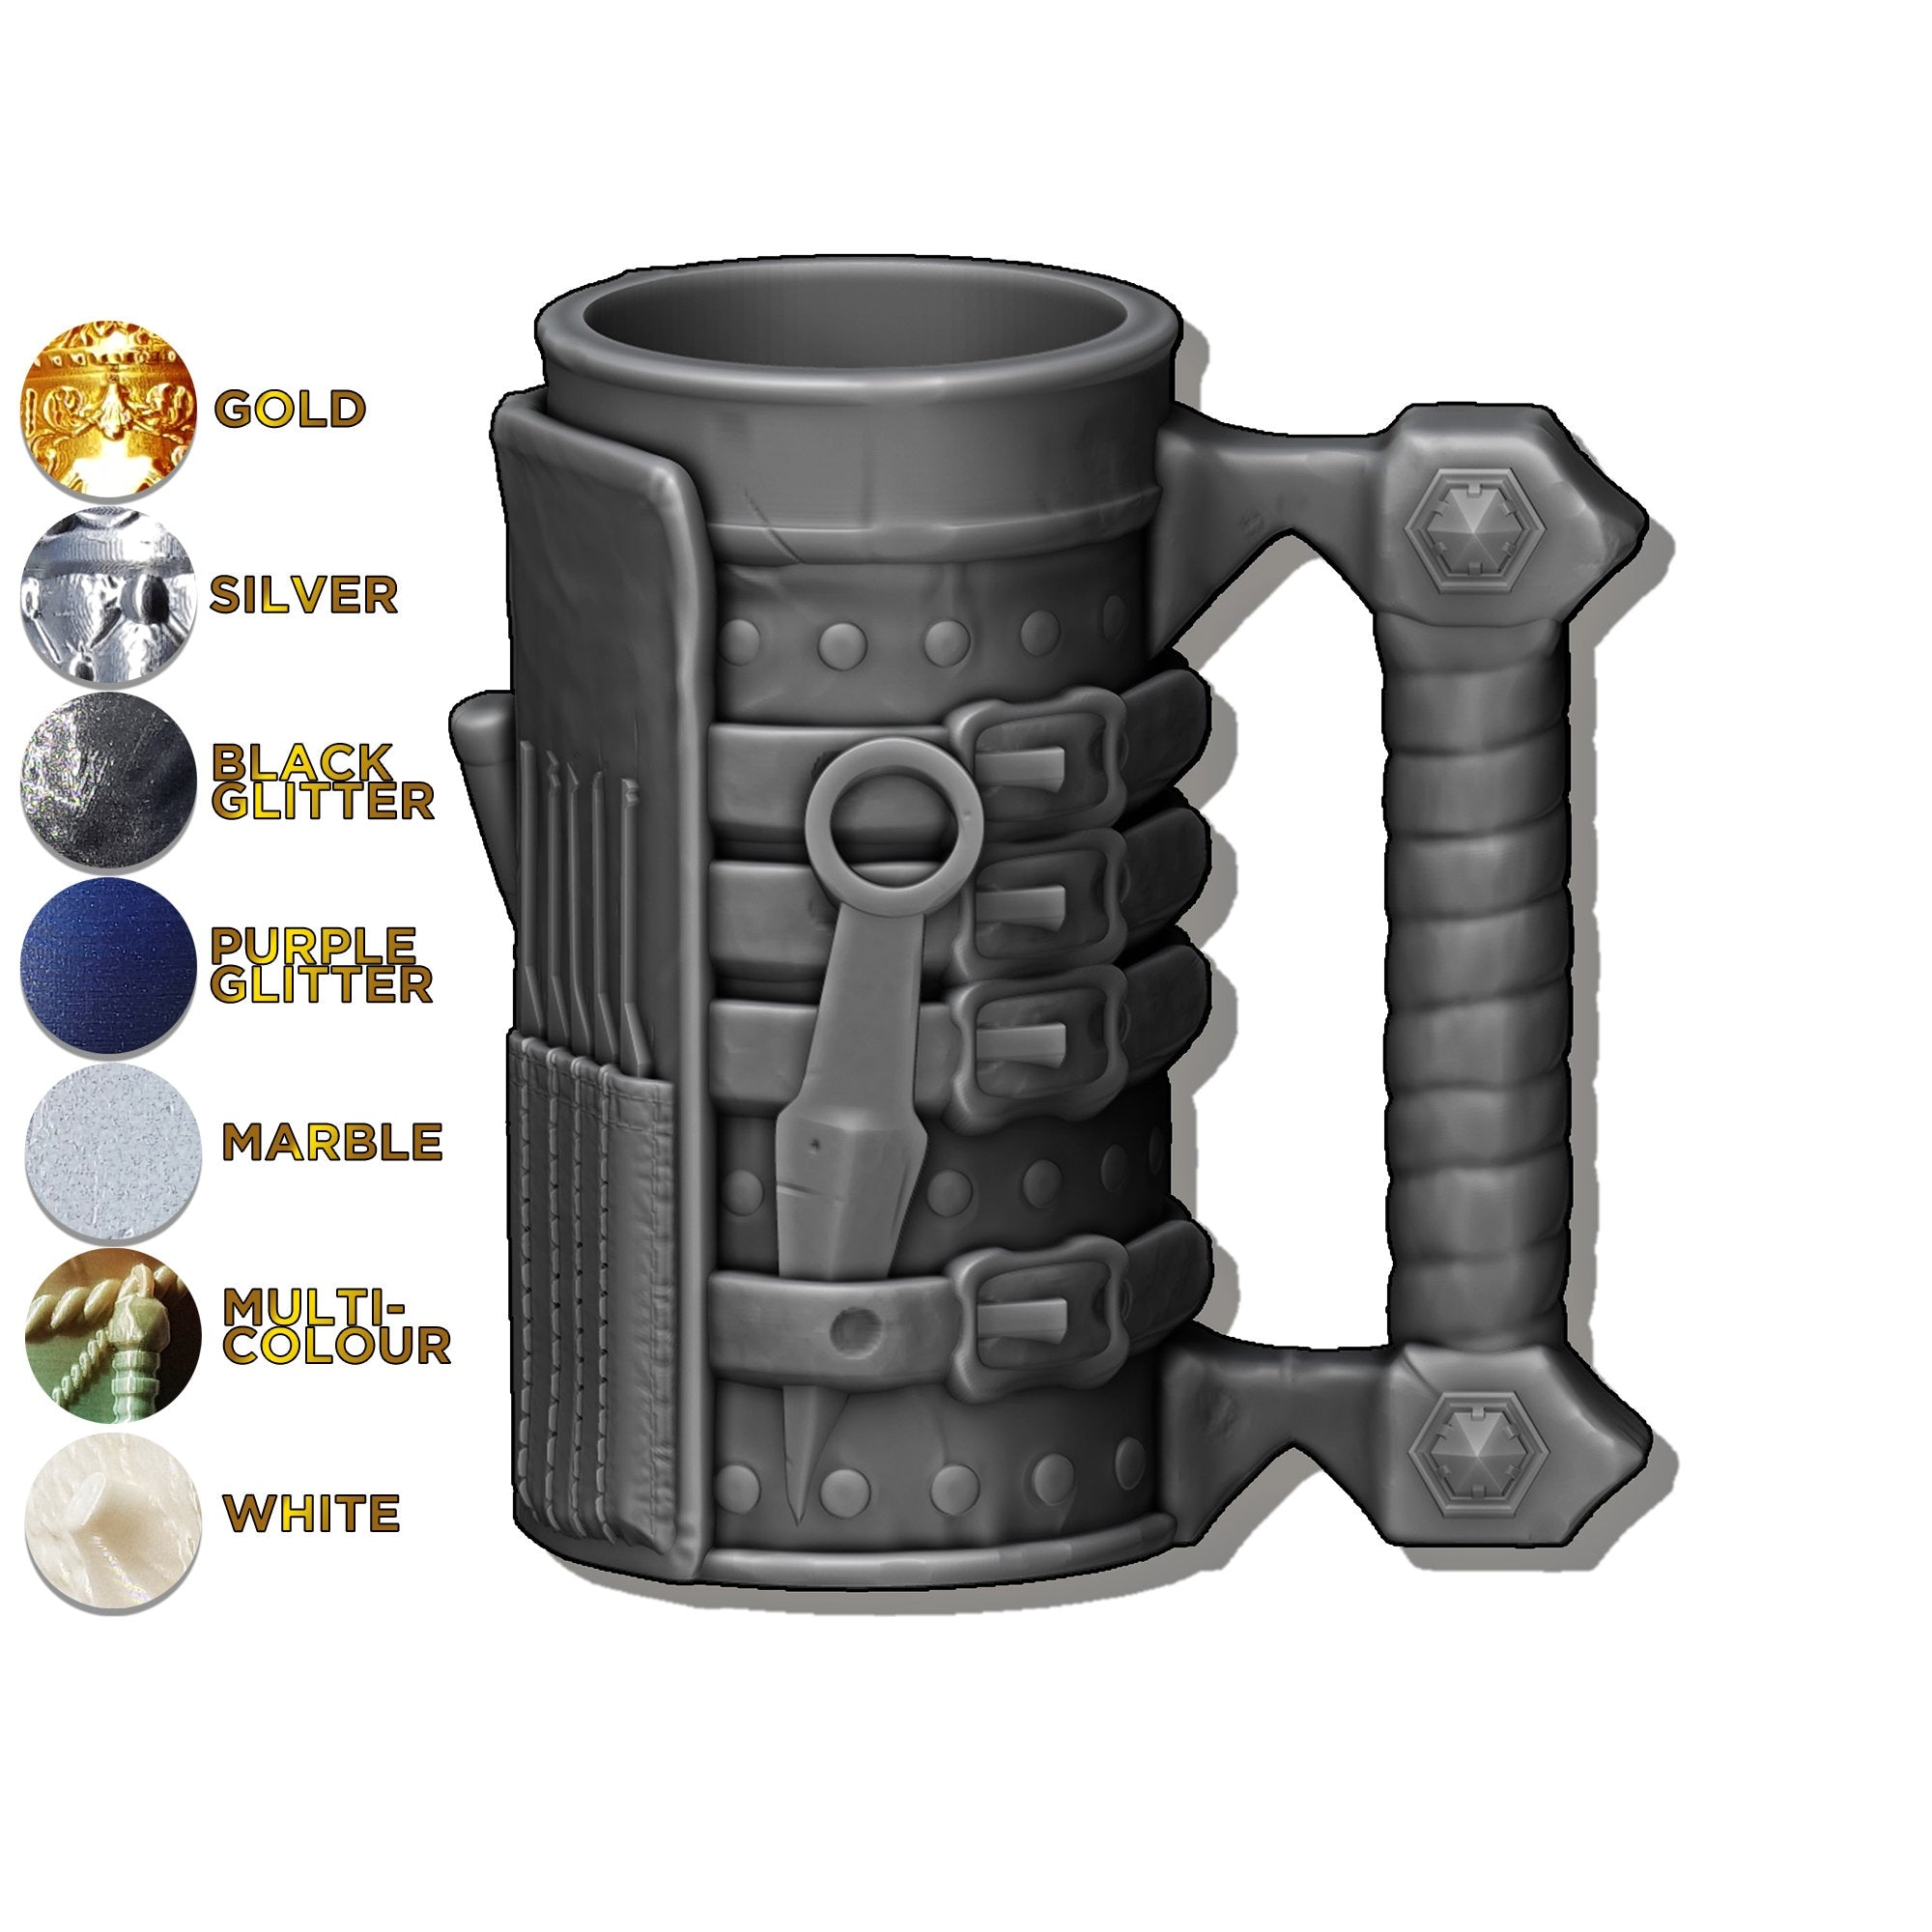 The ROGUE | Mythic Mug | Larp | Gaming Zubehör | Tabletop | Dice Cup | Box | Holder-Role Playing Games